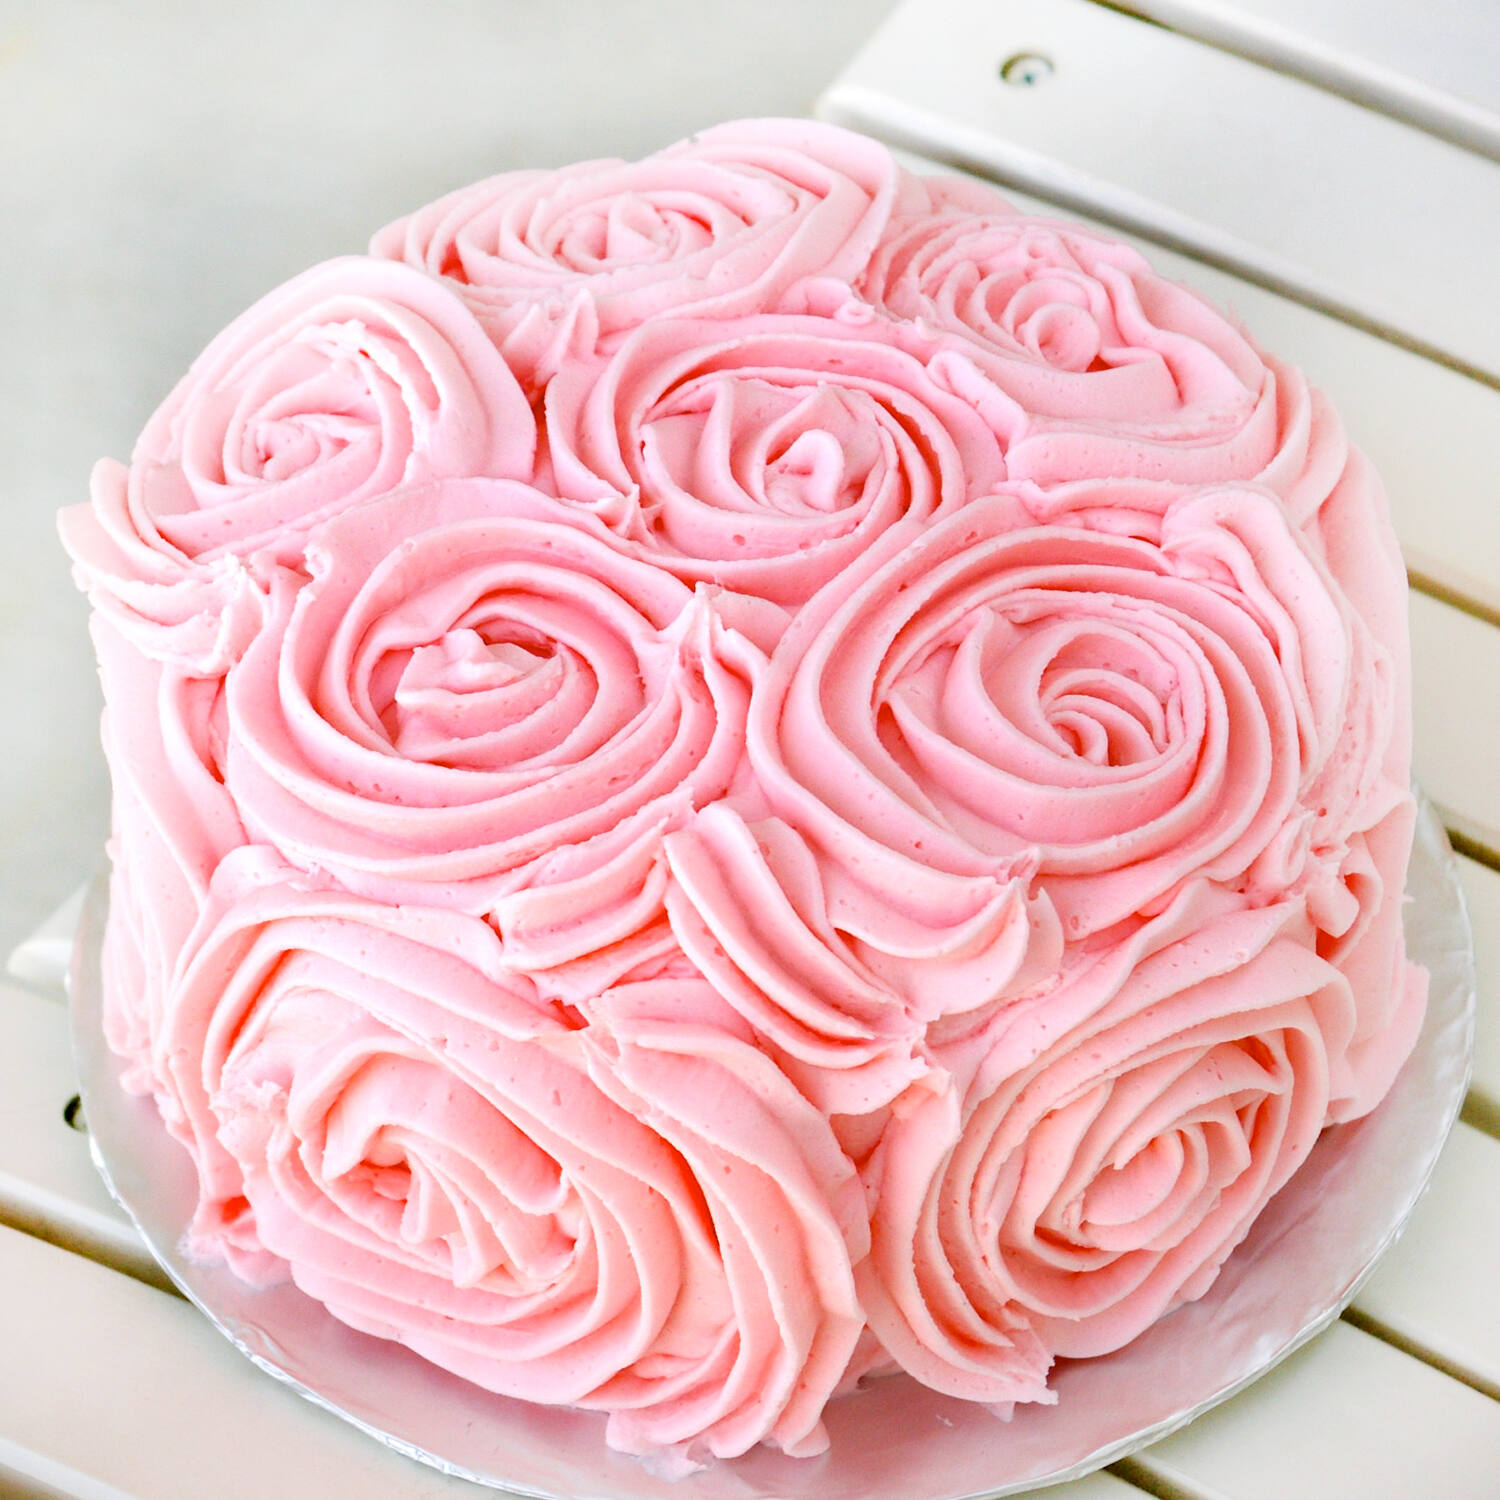 Roses Theme Fondant Cake Delivery In Delhi NCR With Delicious Chocolate  Flavour